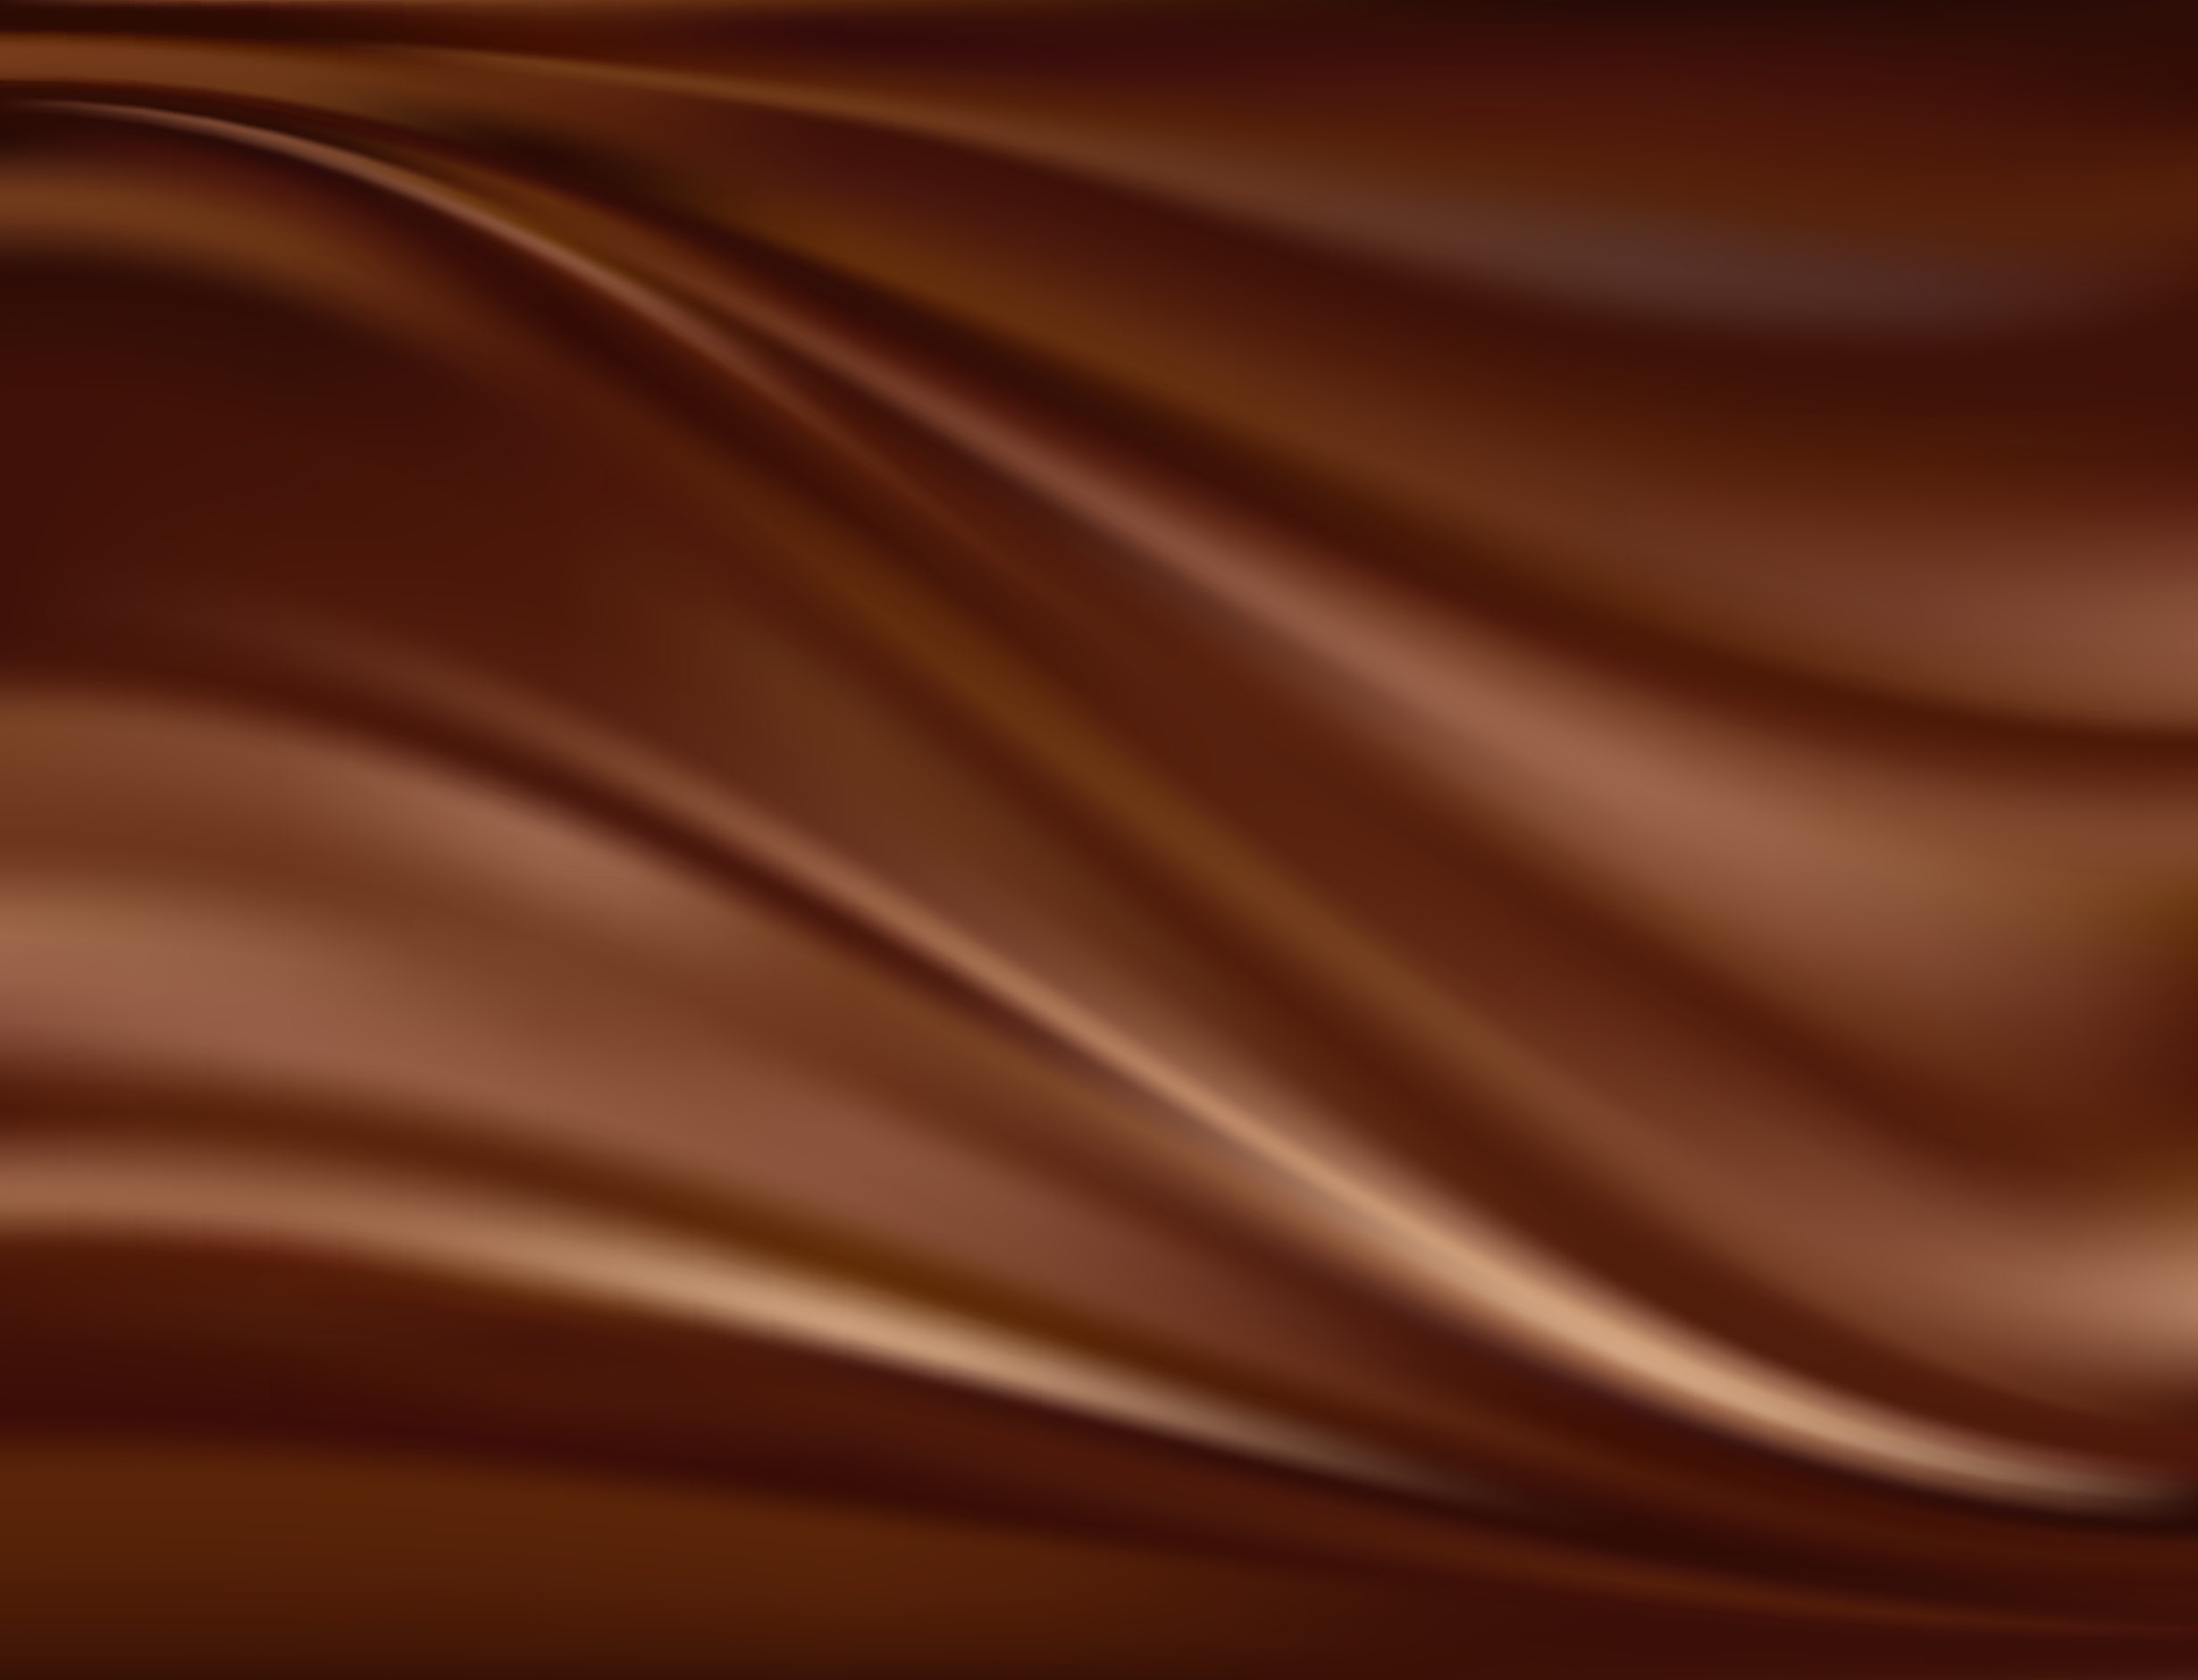 Chocolate Background Gallery Yopriceville High Quality Images